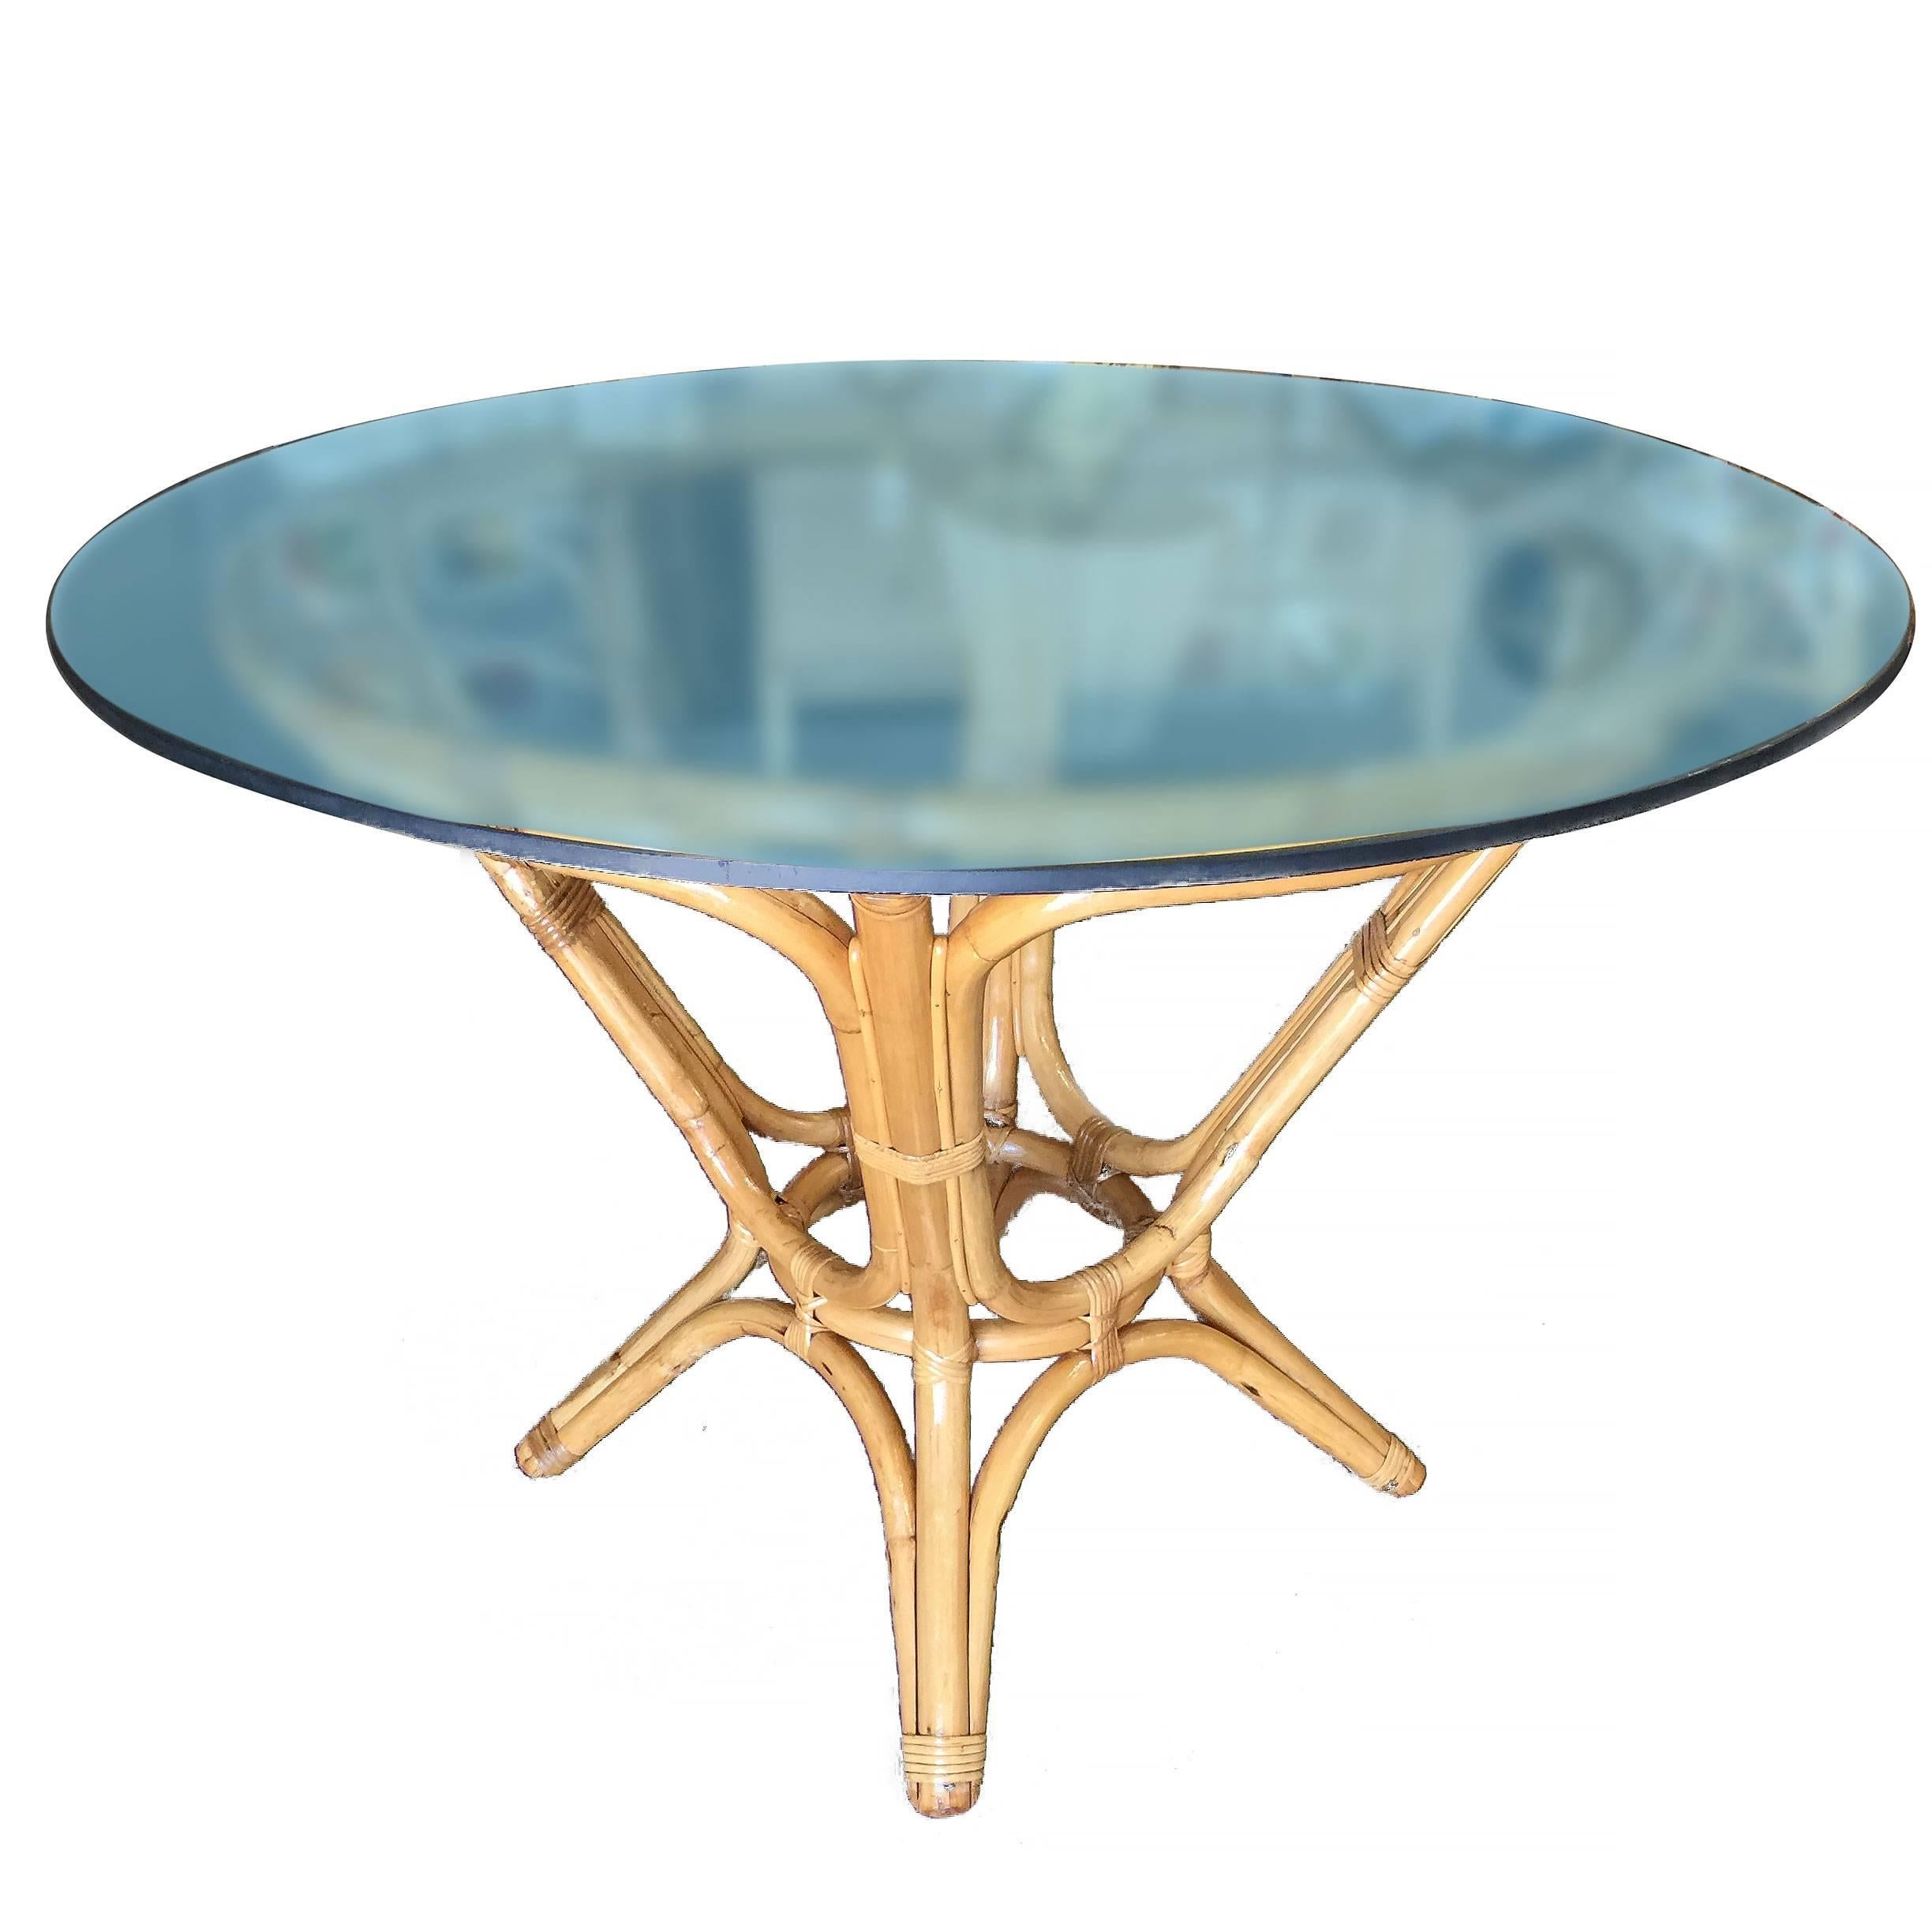 Elegant midcentury dining table features a sculptural hourglass rattan base with a round glass top. The table can easily accommodate four guests depending on the choice of chairs.

Restored to new for you.

All rattan, bamboo and wicker